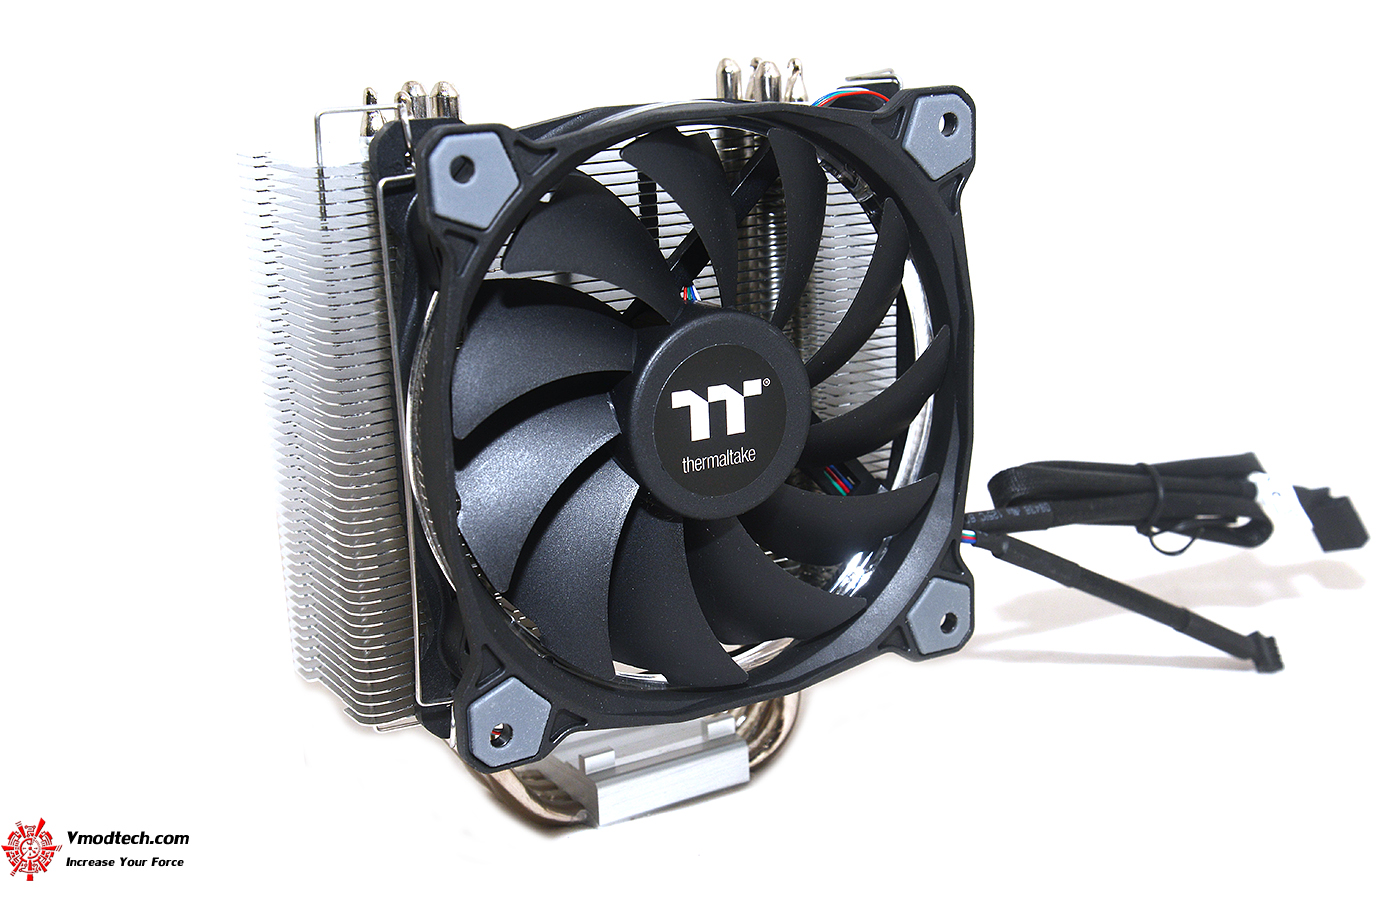 dsc 5340 Thermaltake Riing Silent 12 RGB Sync Edition CPU Cooler Review